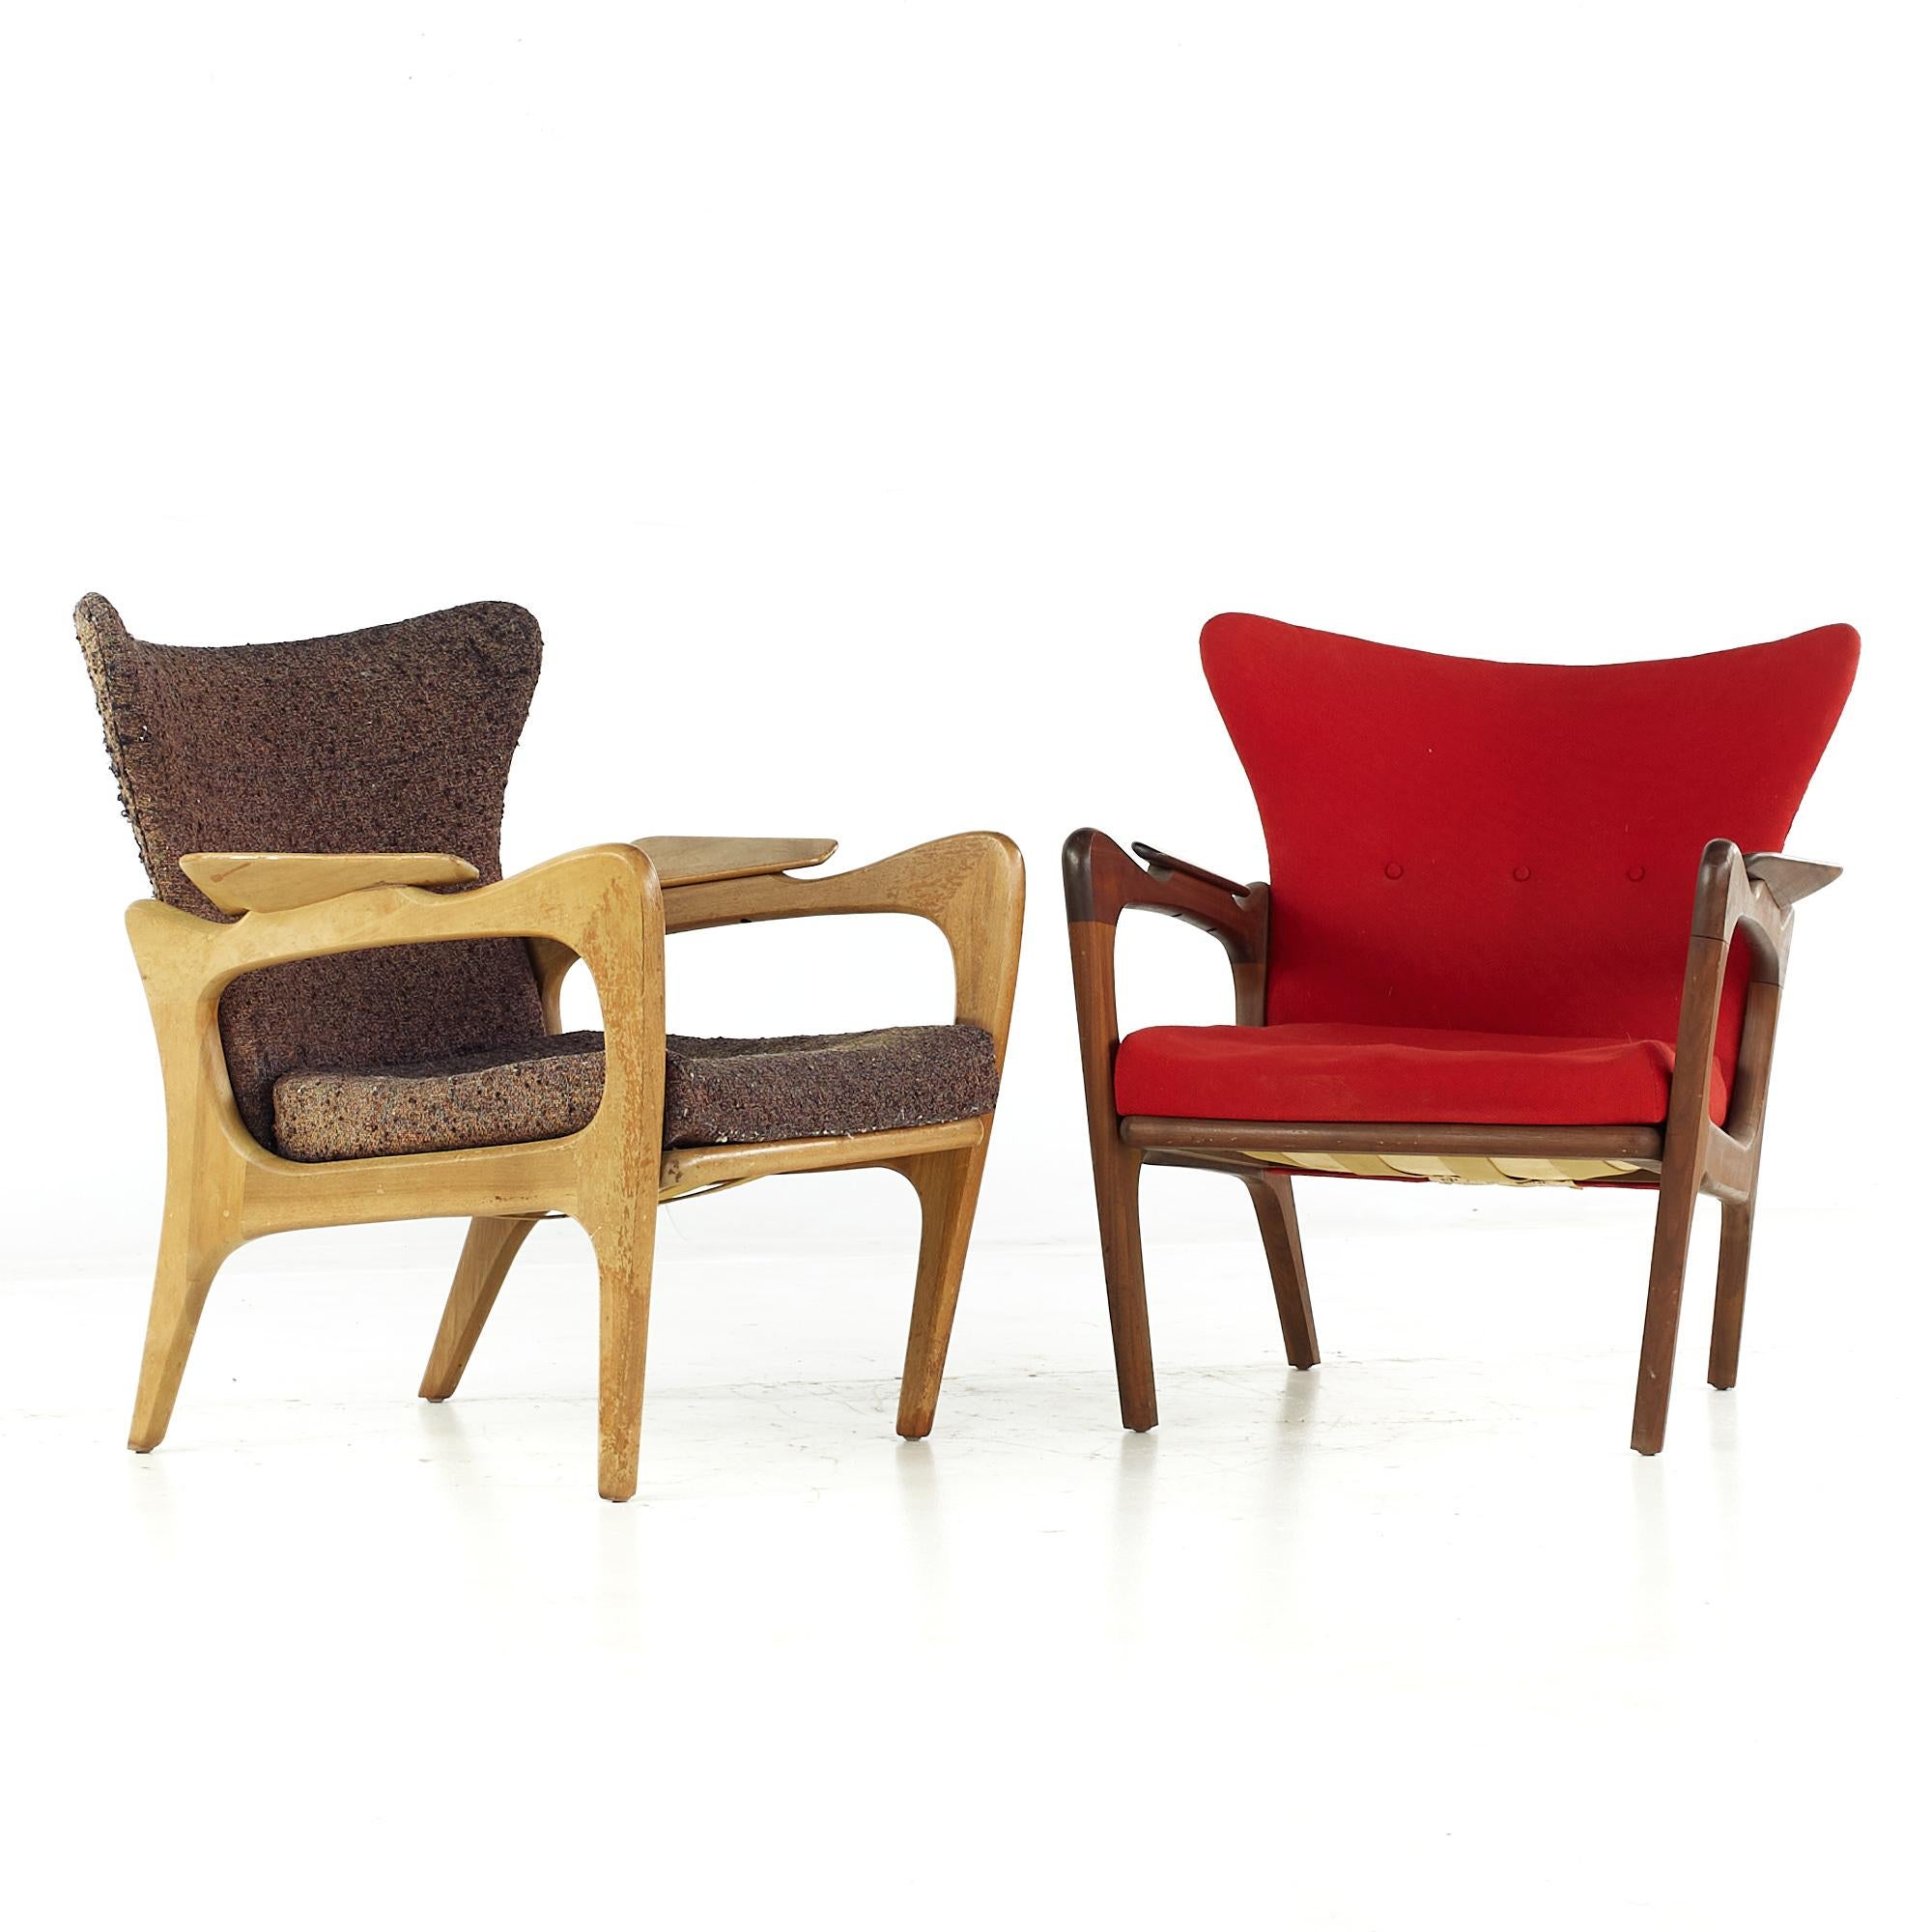 Adrian Pearsall for Craft Associates Mid Century Lounge Chair - Pair

Each chair measures: 28 wide x 30 deep x 31.5 high, with a seat height of 15 and arm height/chair clearance 23 inches

All pieces of furniture can be had in what we call restored